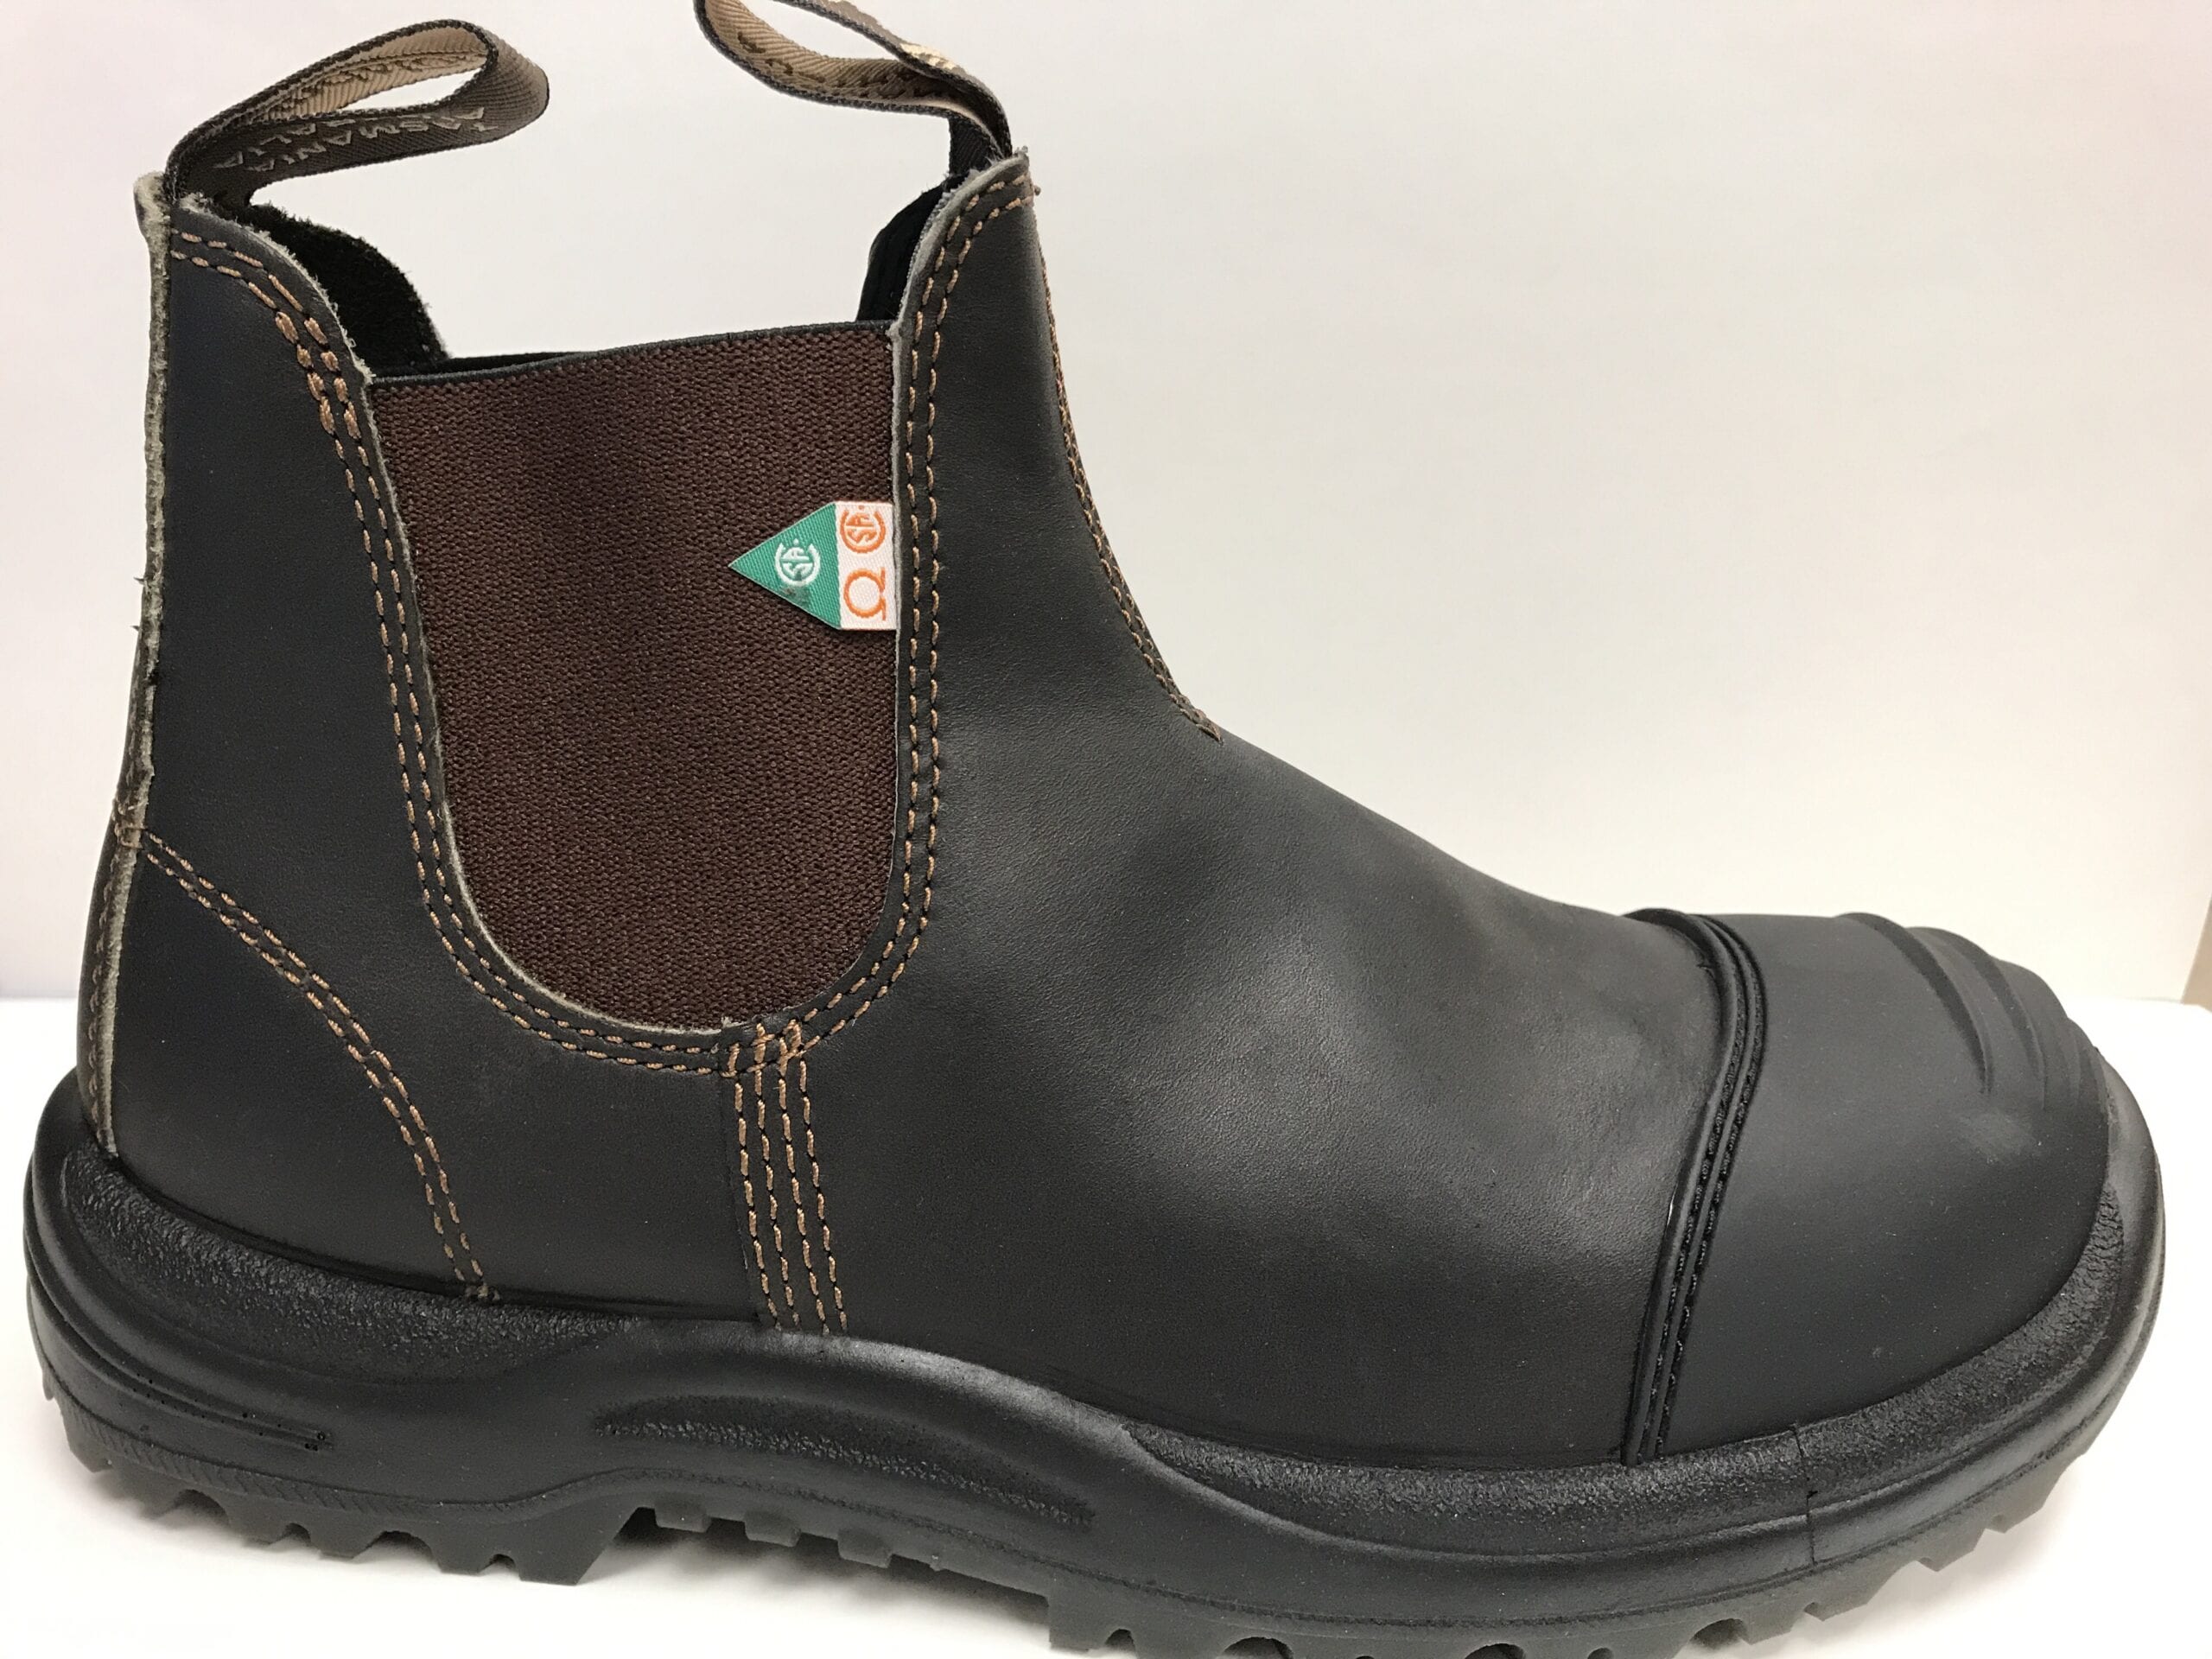 blundstone csa work boots review